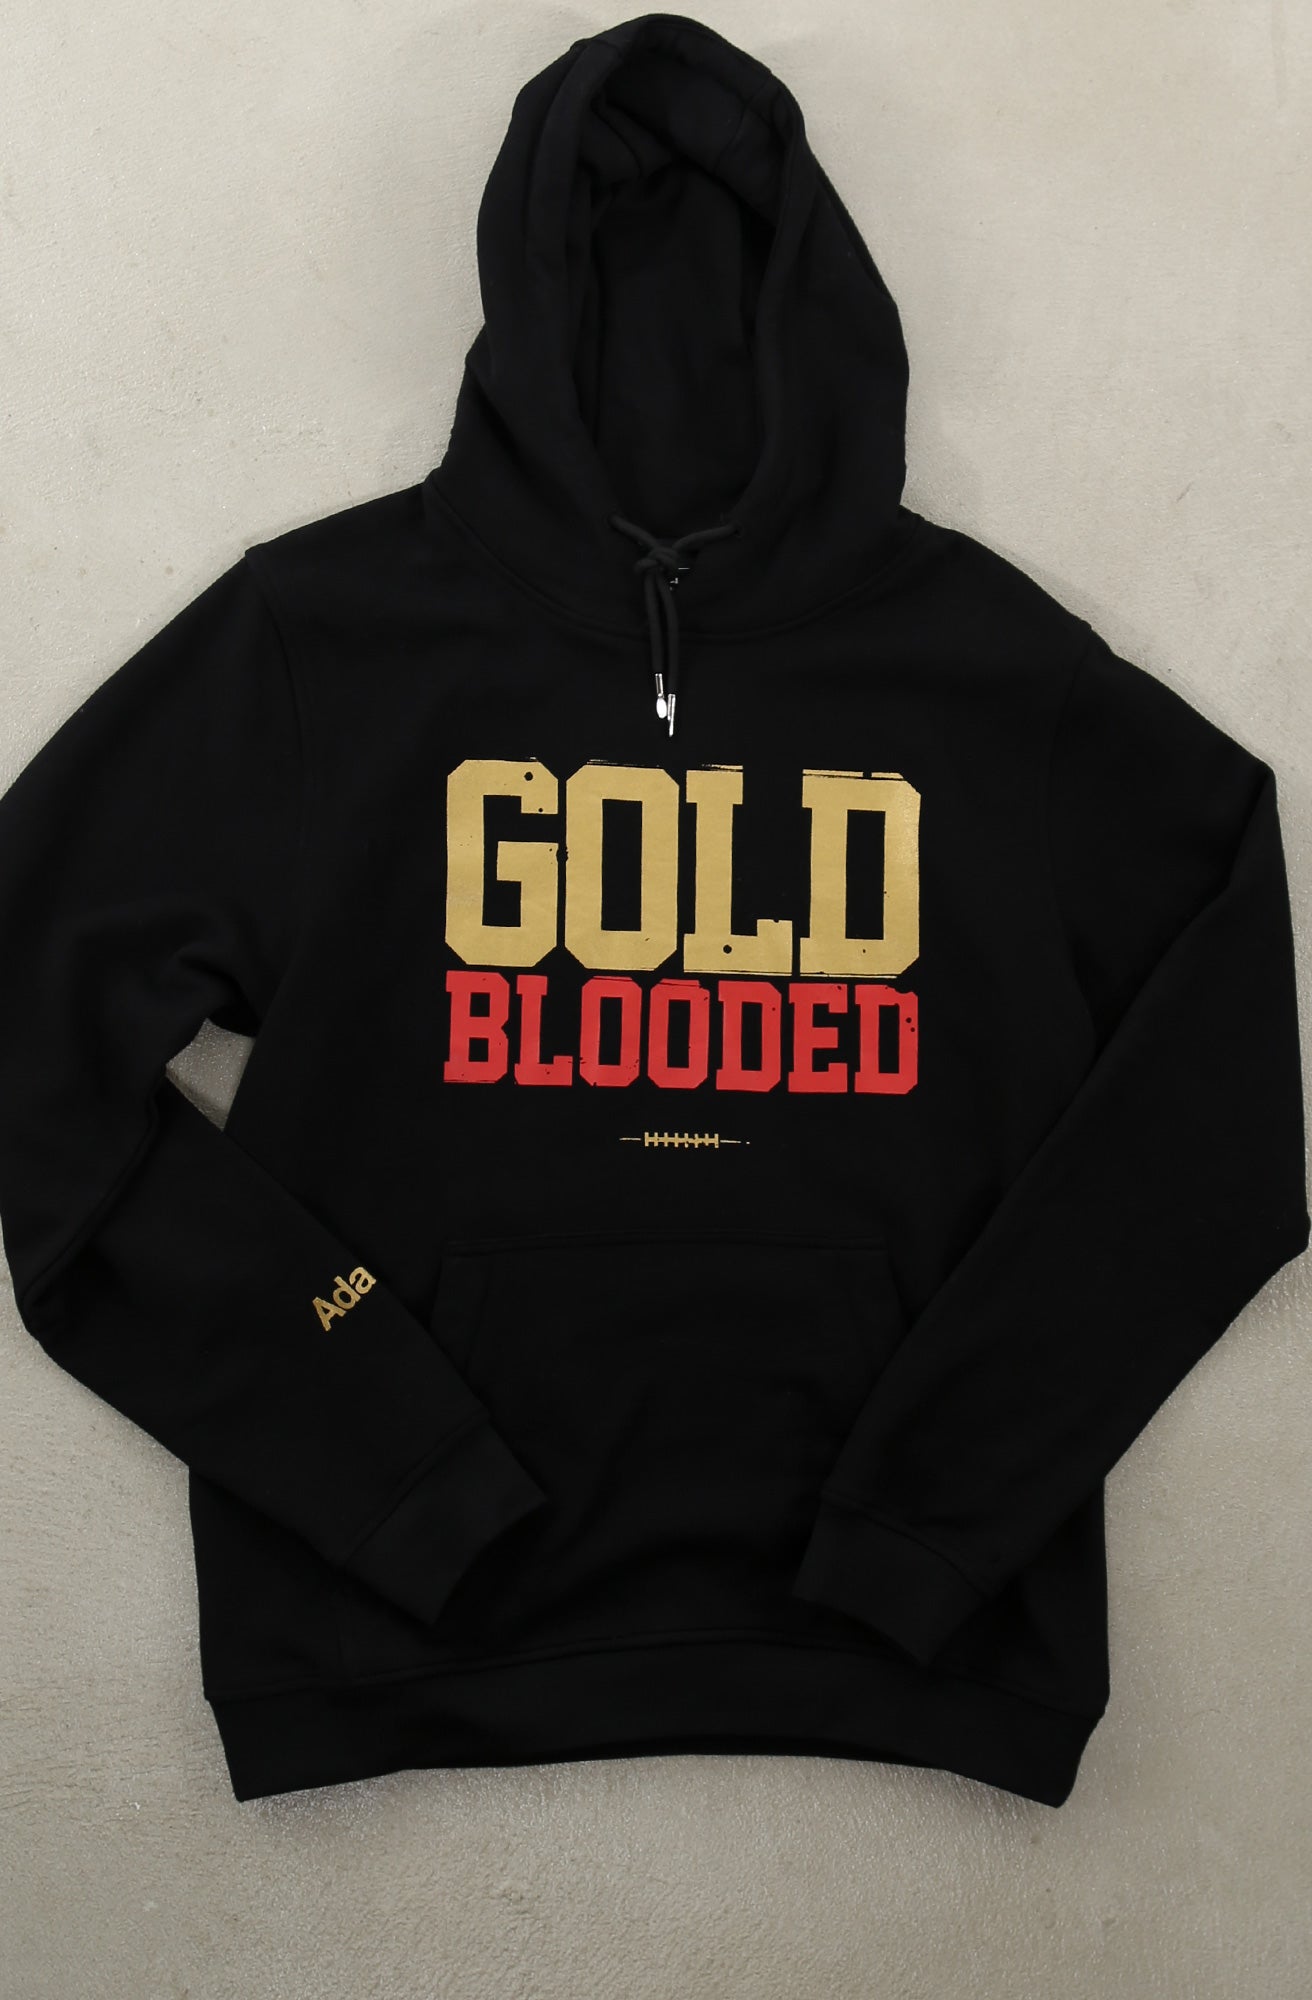 Gold Blooded (Men's Black/Red A1 Hoody)